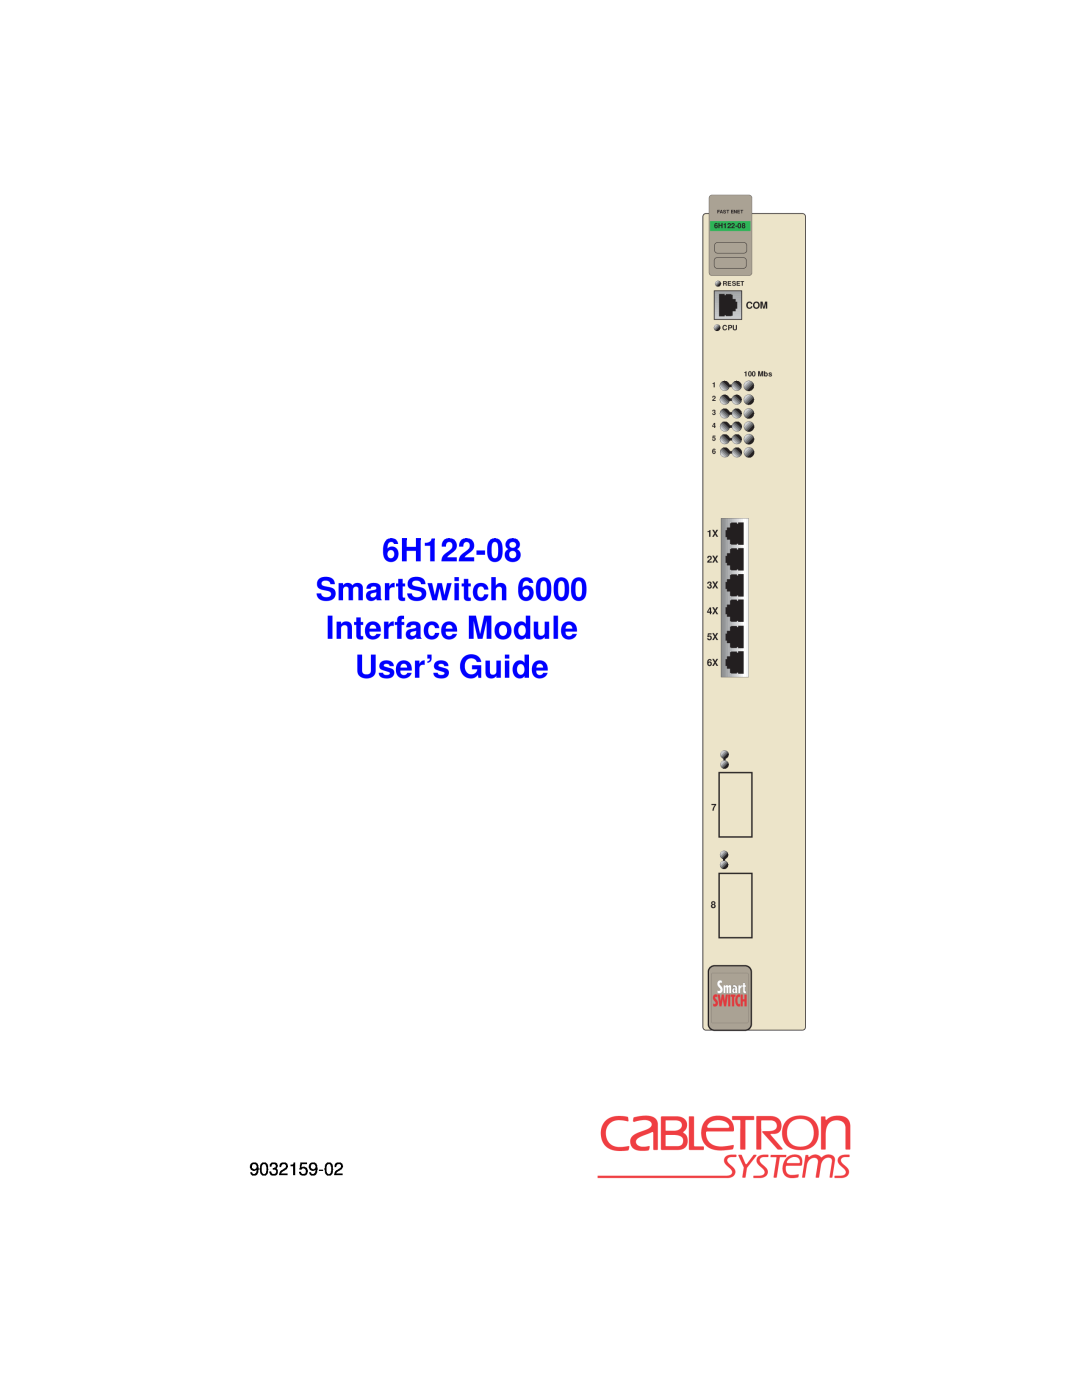 Cabletron Systems manual 6H122-08 SmartSwitch 6000 Interface Module User’s Guide, 1X 2X 3X 4X 5X 6X, 6H122-08 RESET 